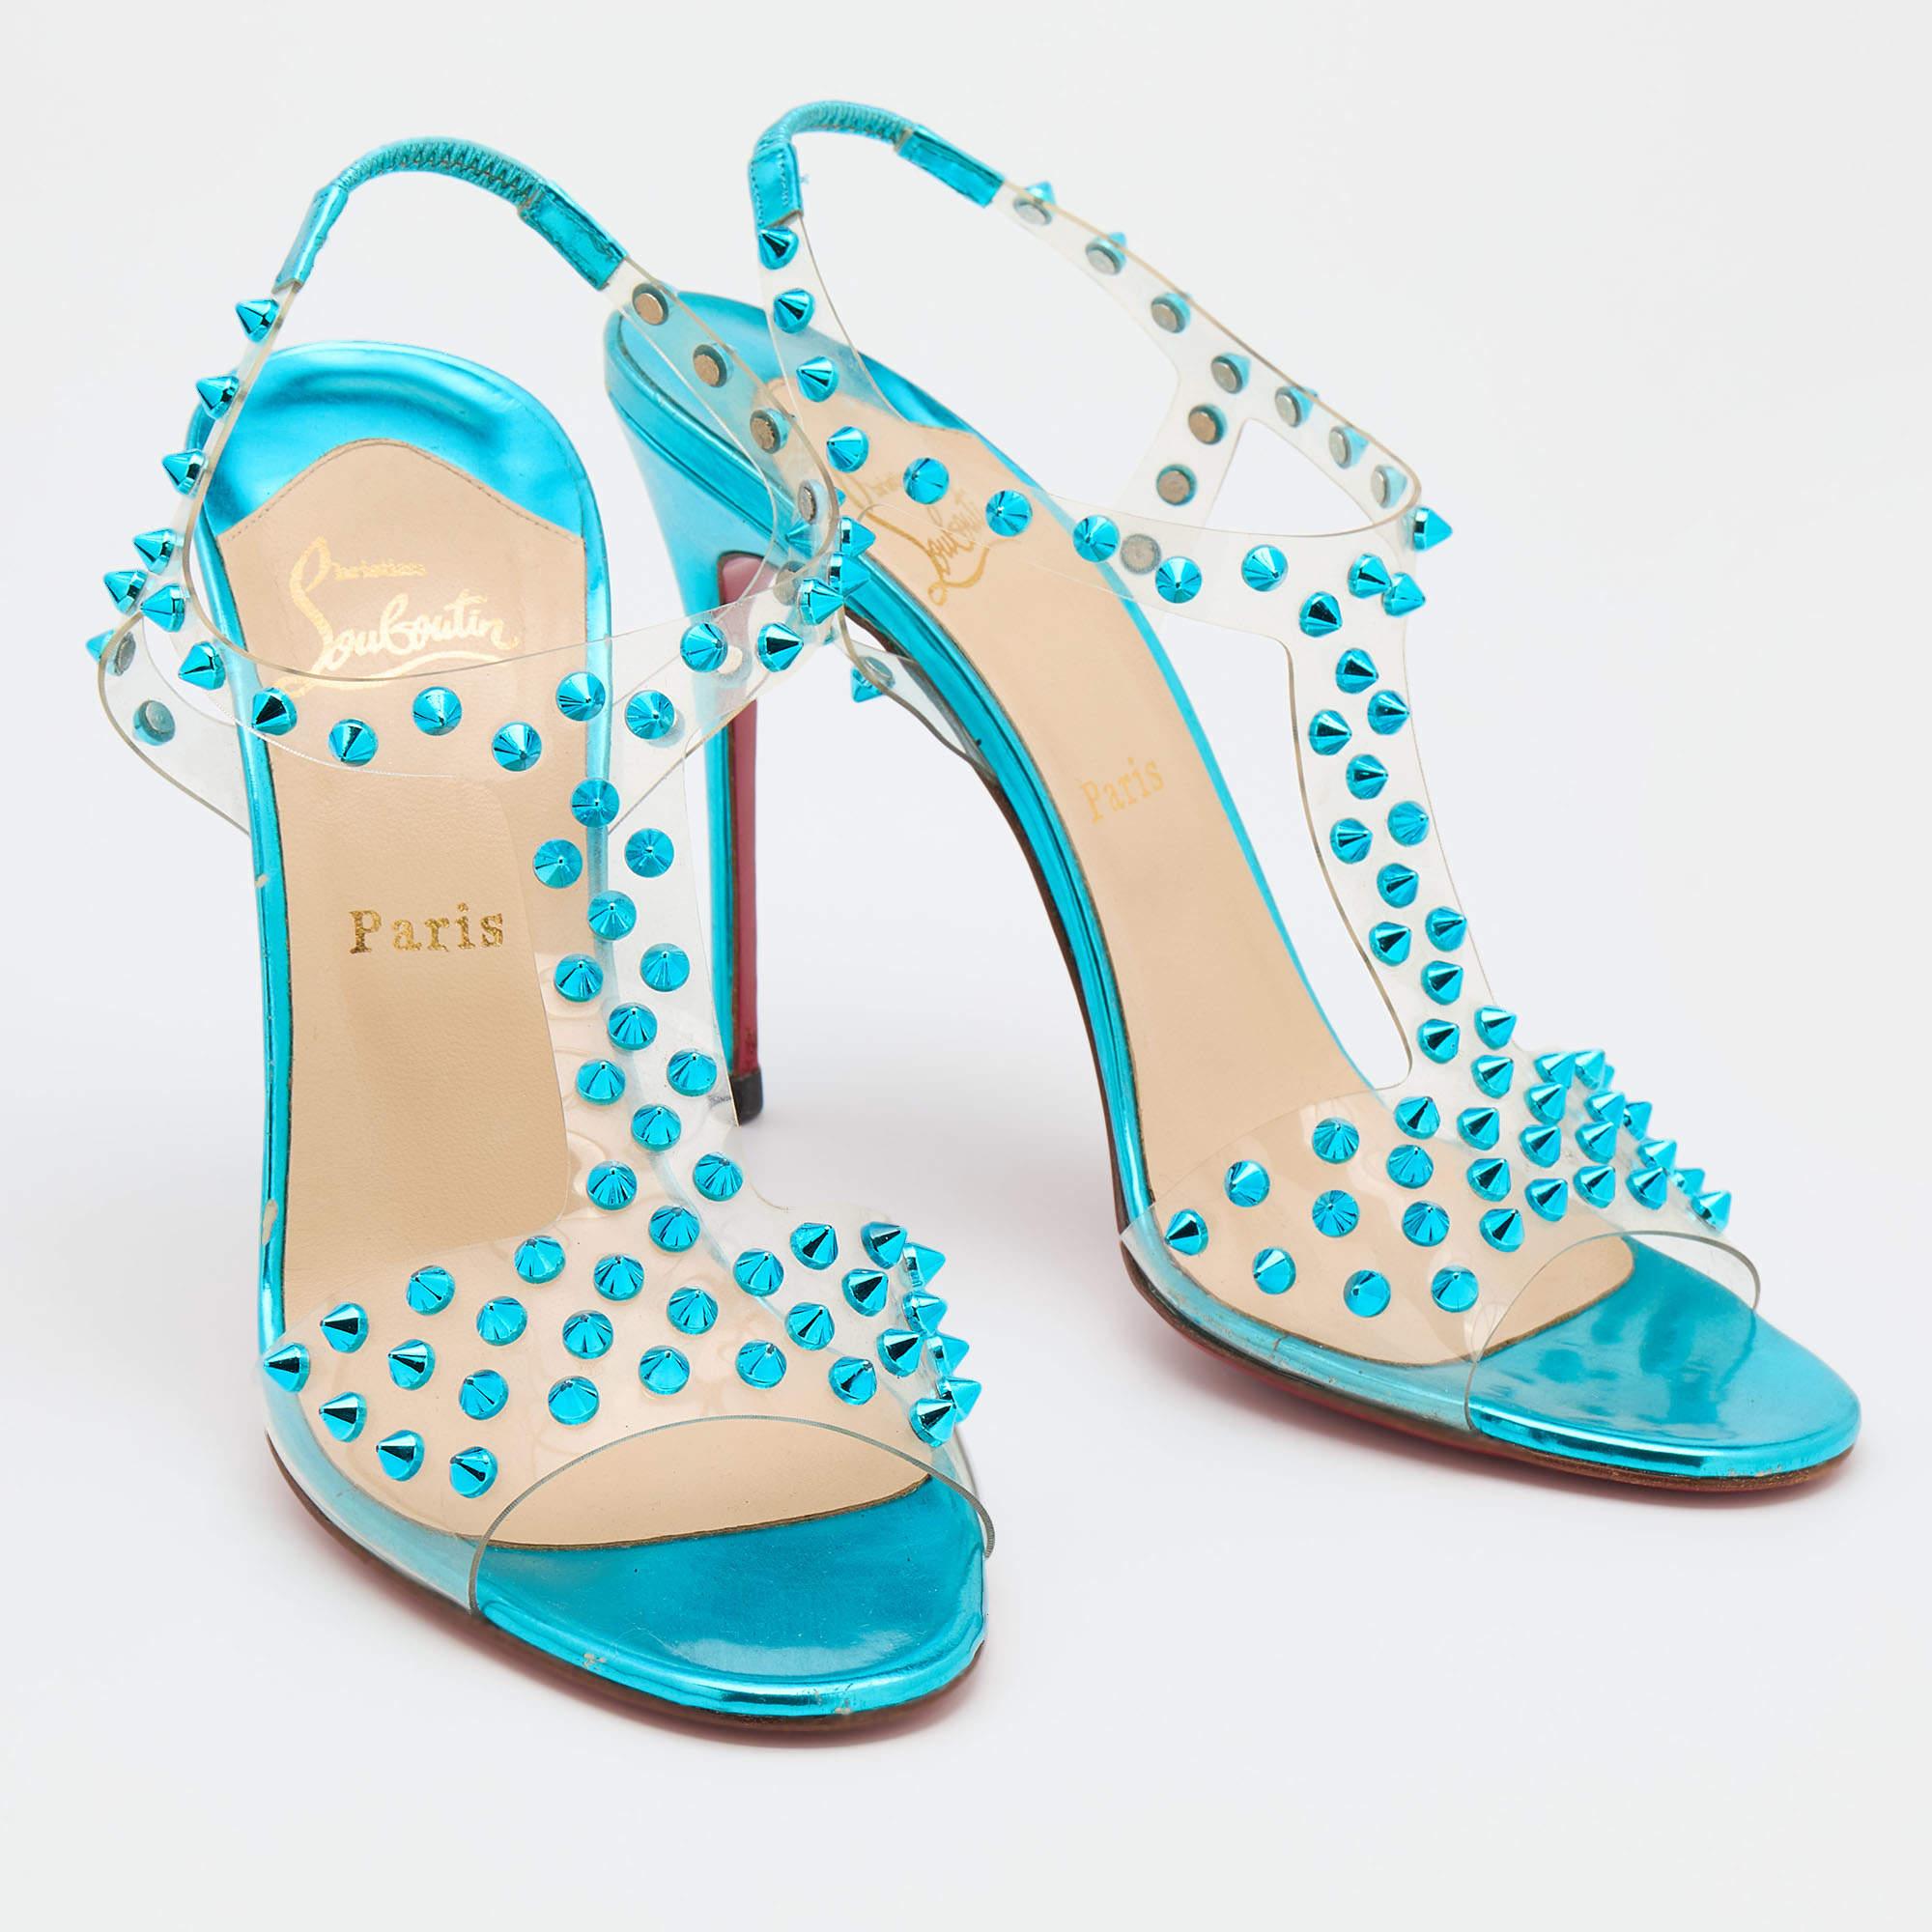 Christian Louboutin Transparent/Turquoise Spike J Lissimo Sandals Size 41 In Good Condition For Sale In Dubai, Al Qouz 2